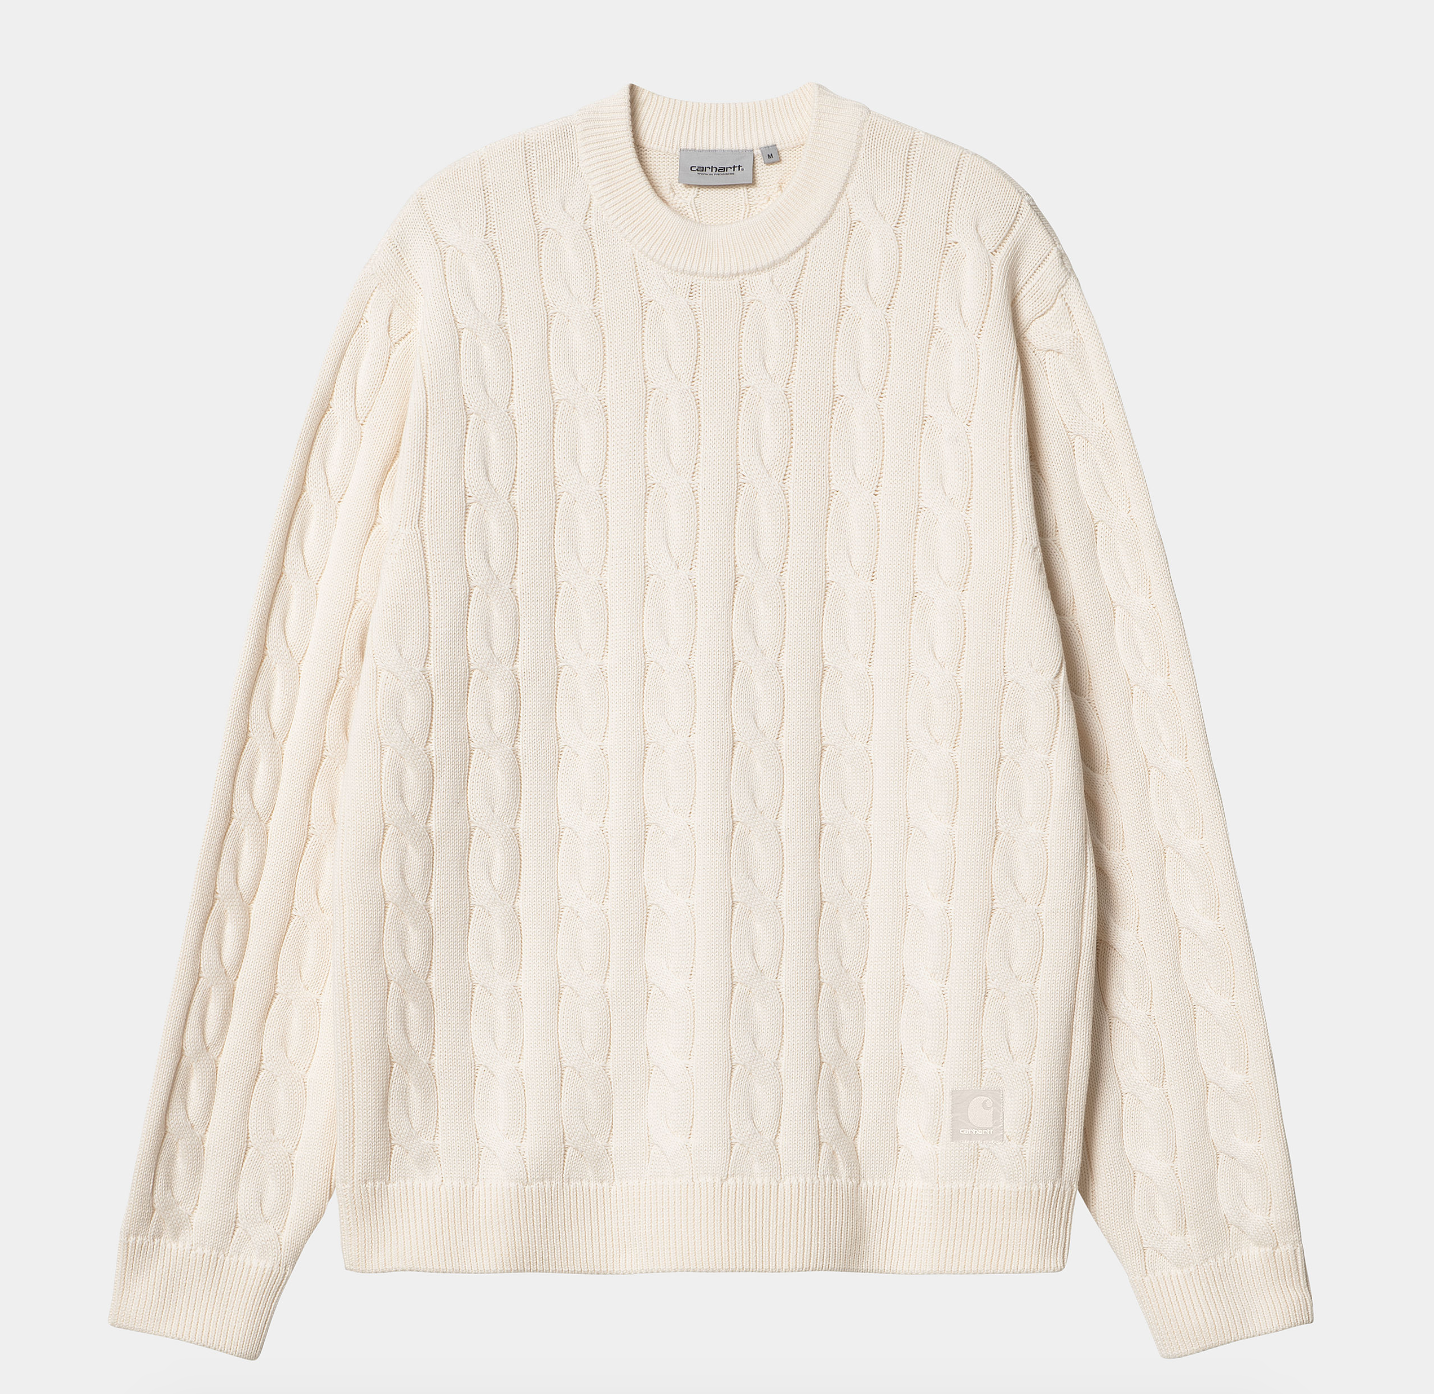 CAMBELL SWEATER NATURAL 100% COTTON